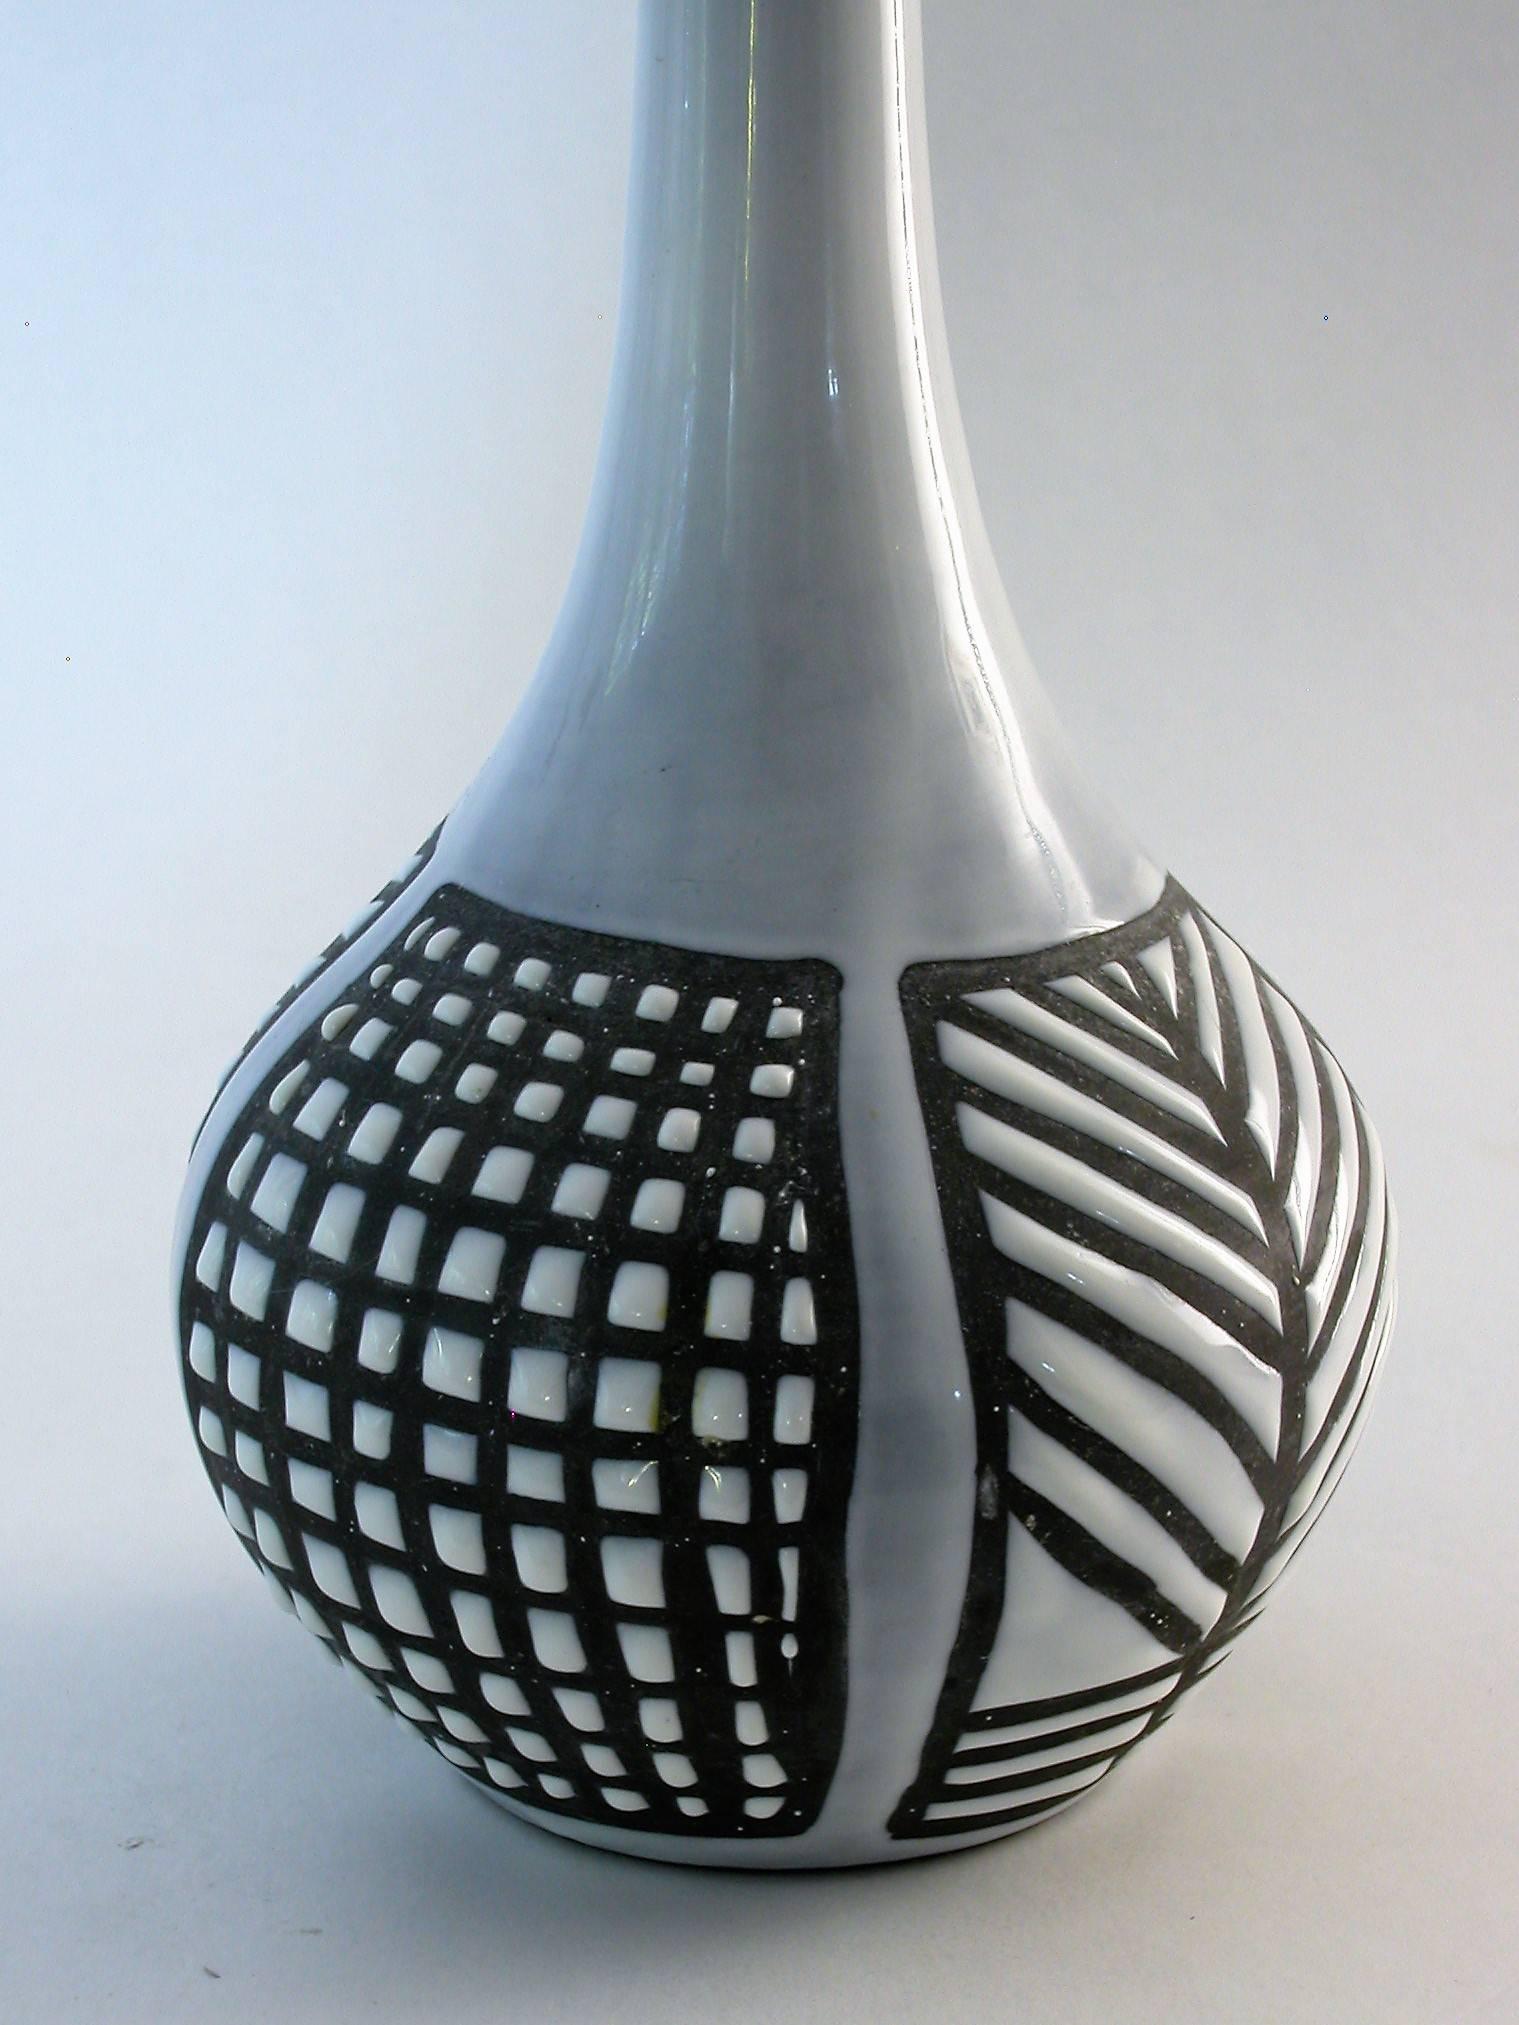 Beautiful vase by Roger Capron.
Signed Capron, Vallauris 025.